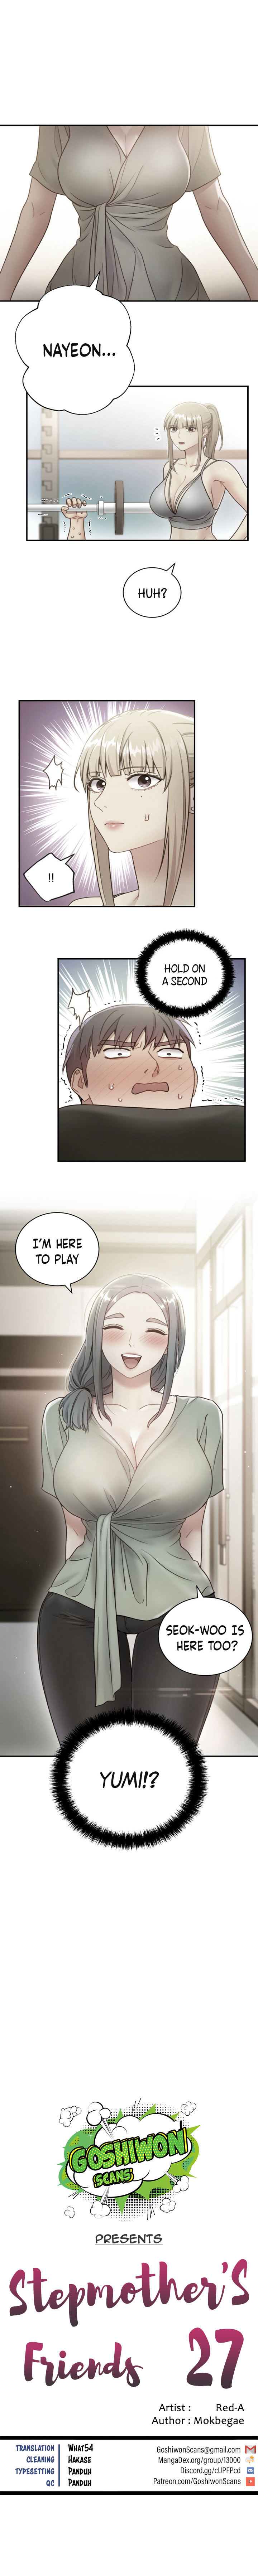 Panel Image 1 for chapter 27 of manhwa Stepmother